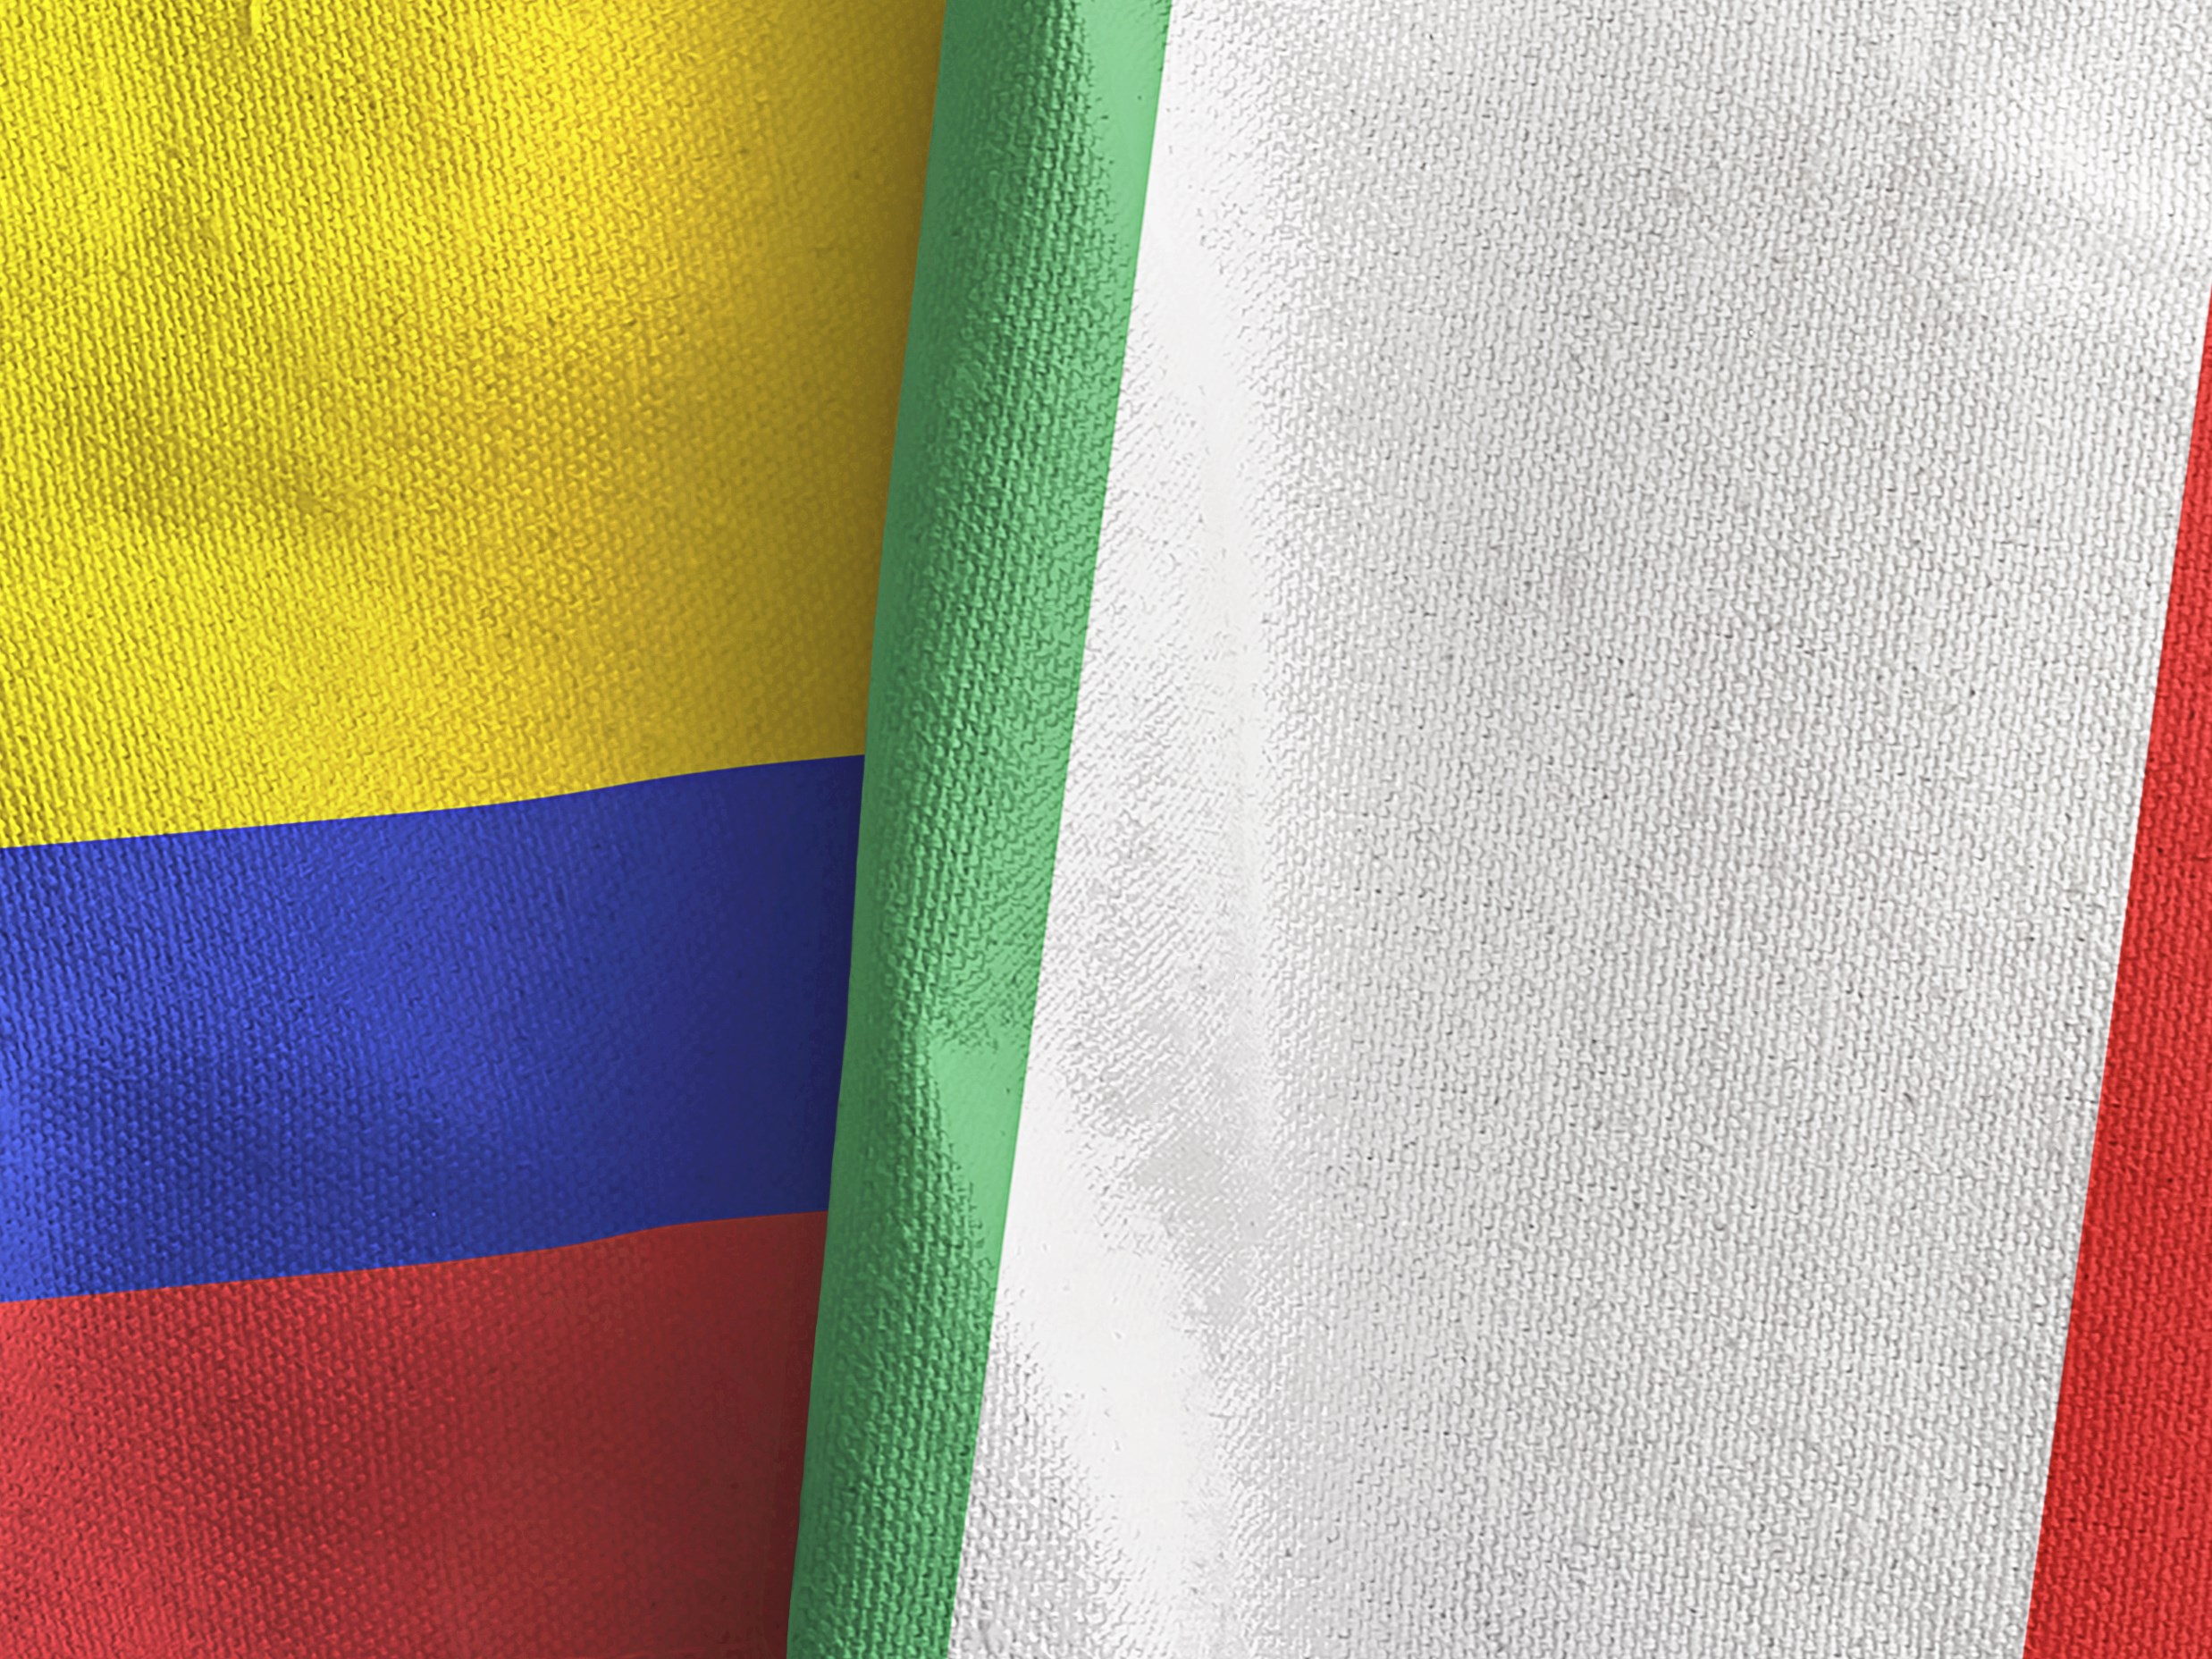 Italian textile machinery companies head to Colombia